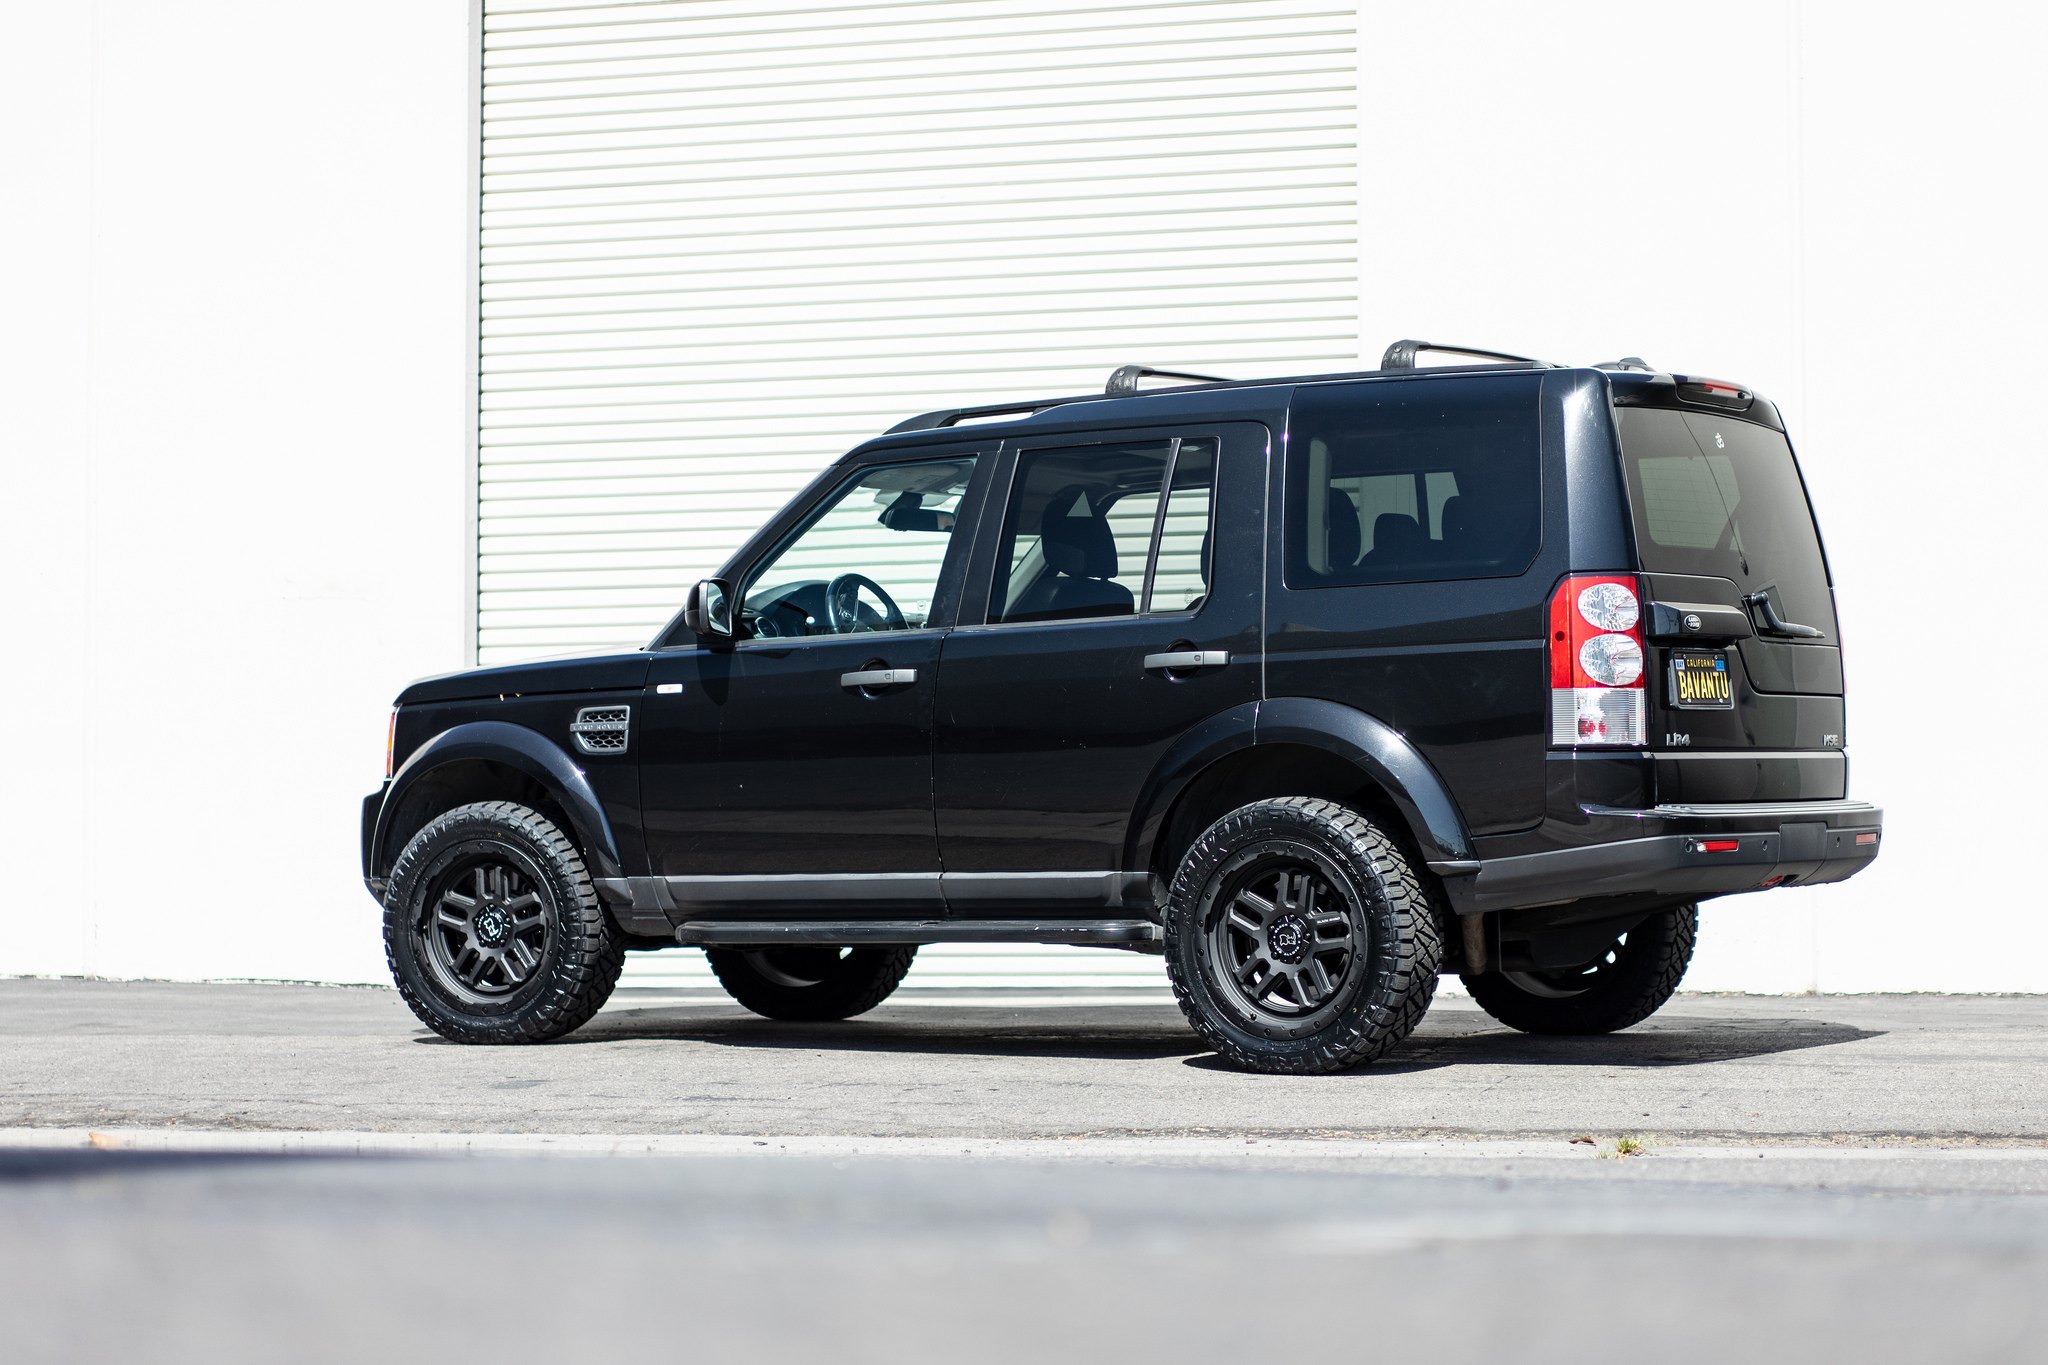 Aftermarket Running Boards on Black Land Rover Discovery - Photo by Black Rhino Wheels